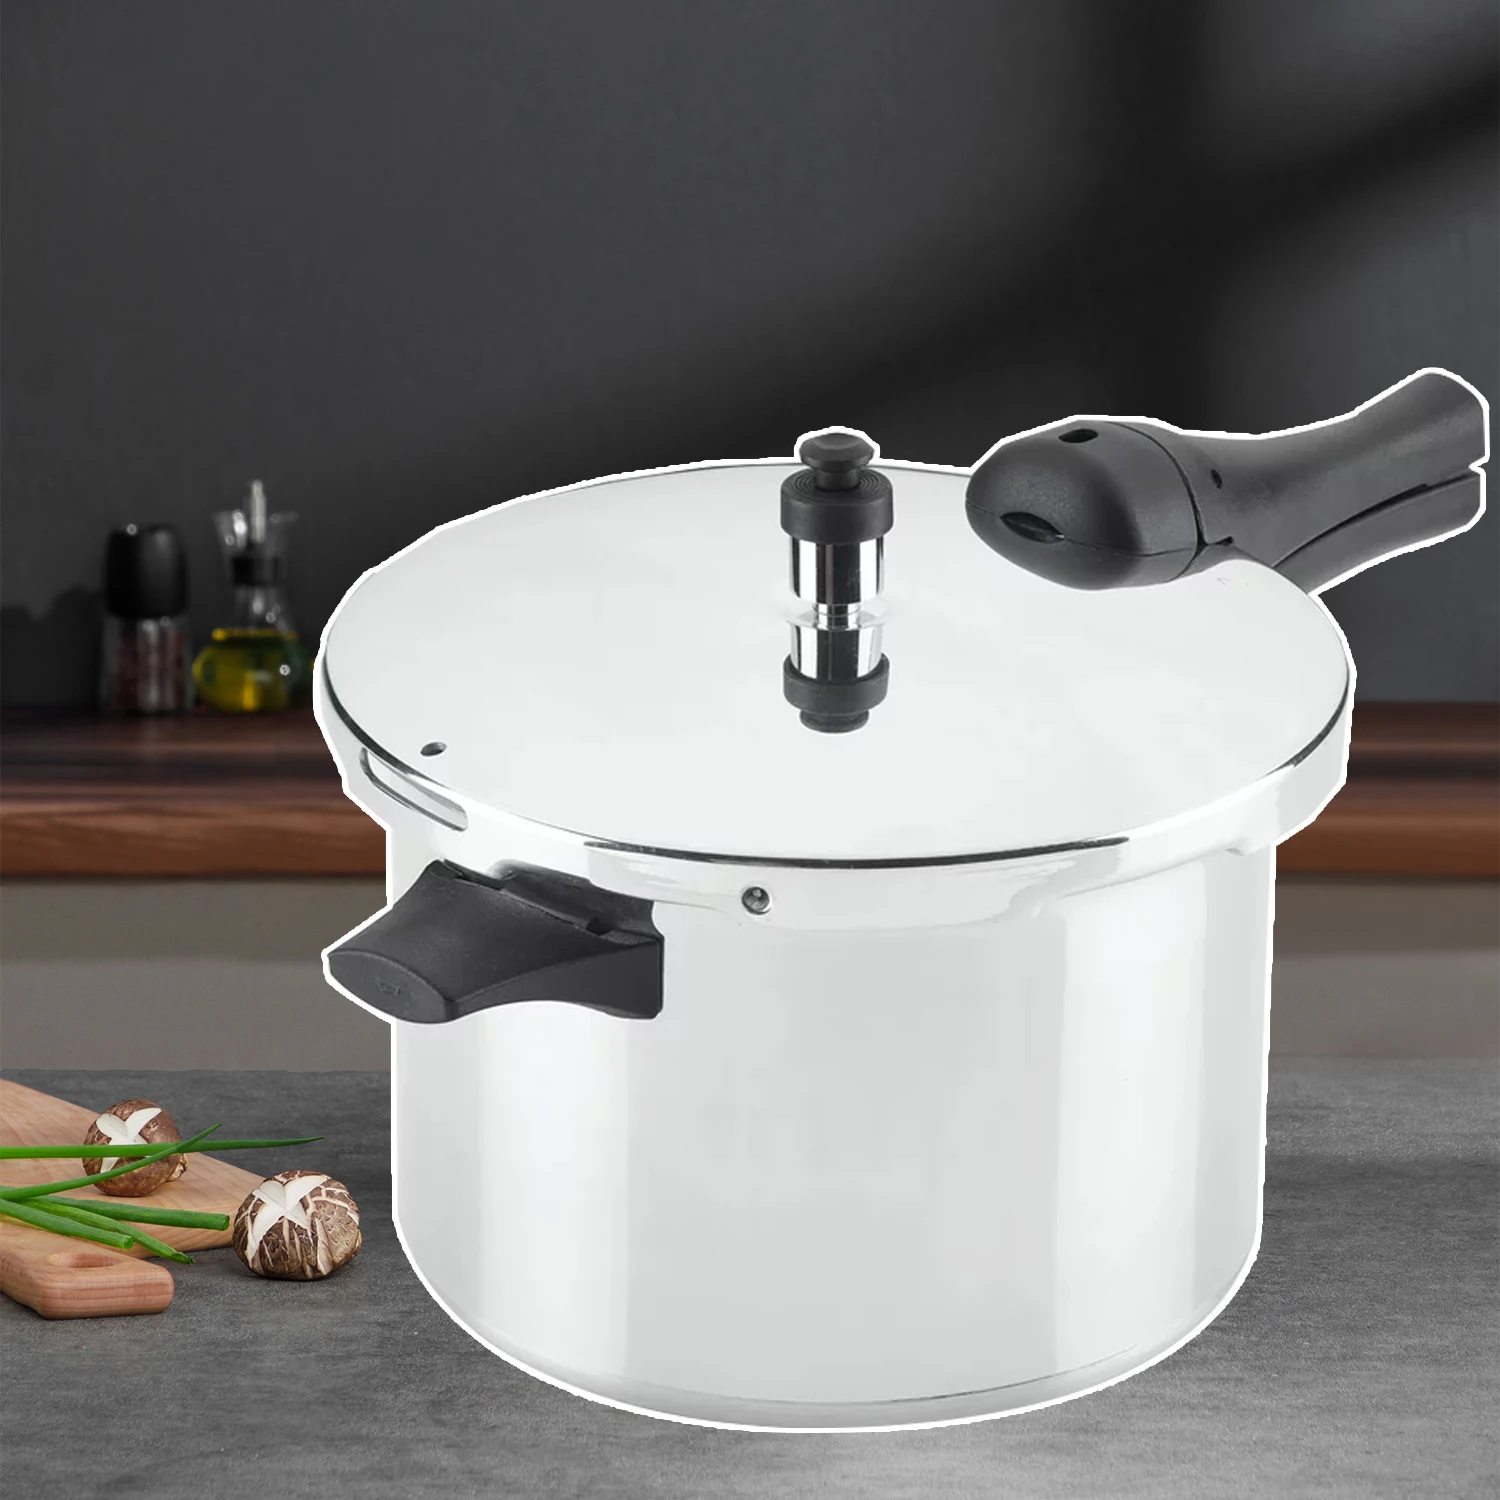 https://ae01.alicdn.com/kf/S7708e7ca518743d89b82e53dec5c2b7eB/Aluminum-Stovetop-Pressure-Cooker-6-Quart-Safe-Durable-Easy-To-Clean.jpg